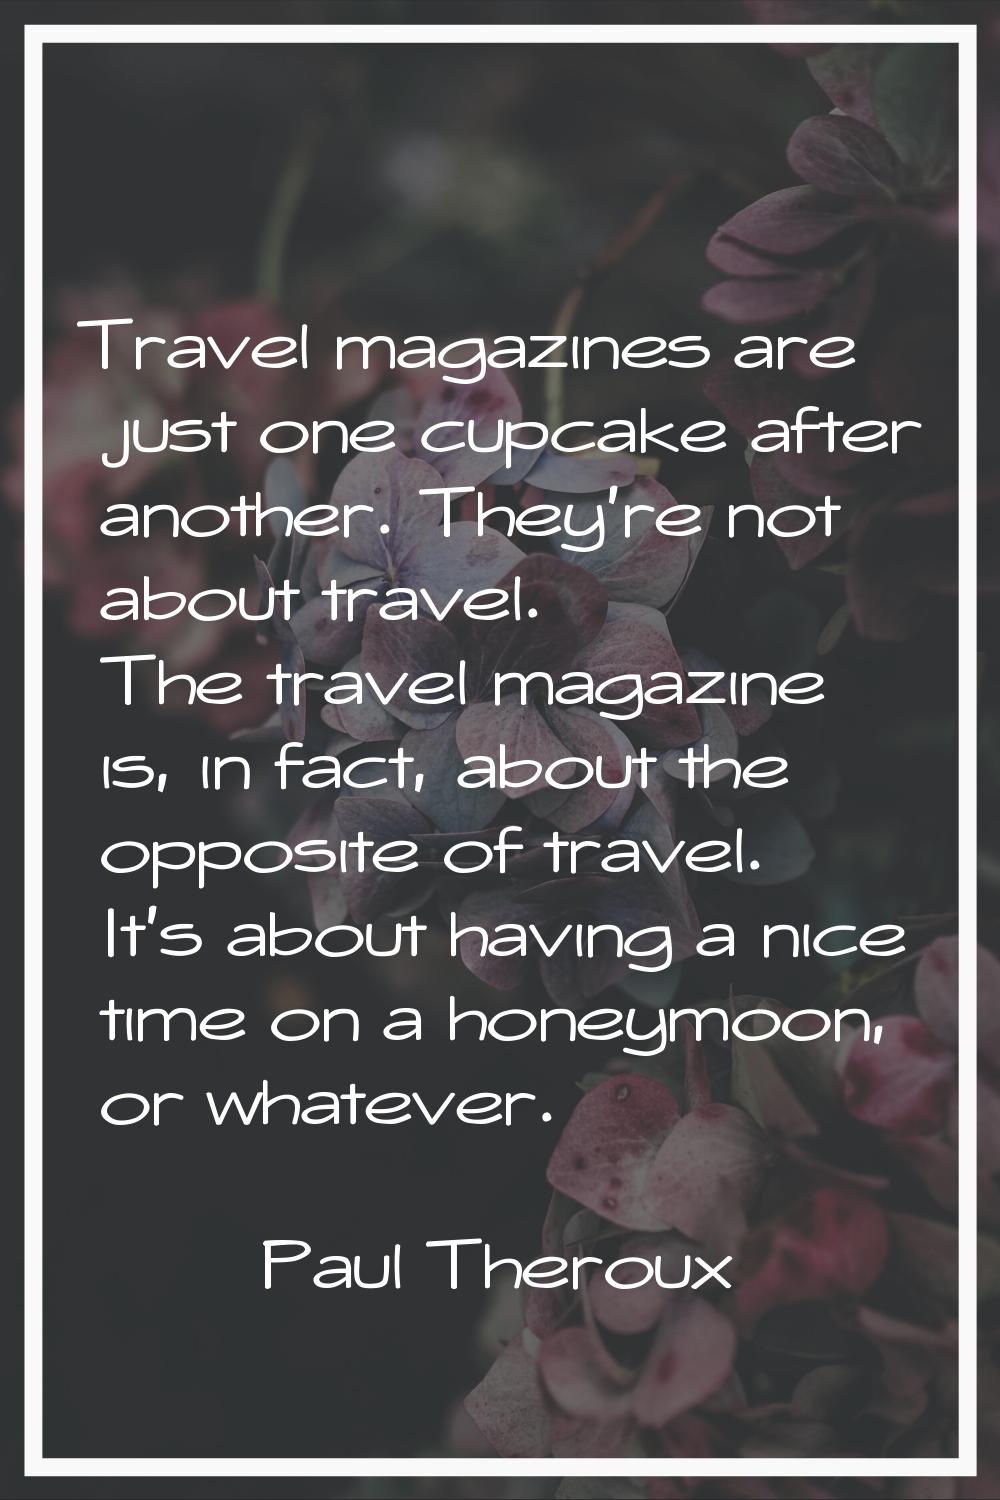 Travel magazines are just one cupcake after another. They're not about travel. The travel magazine 